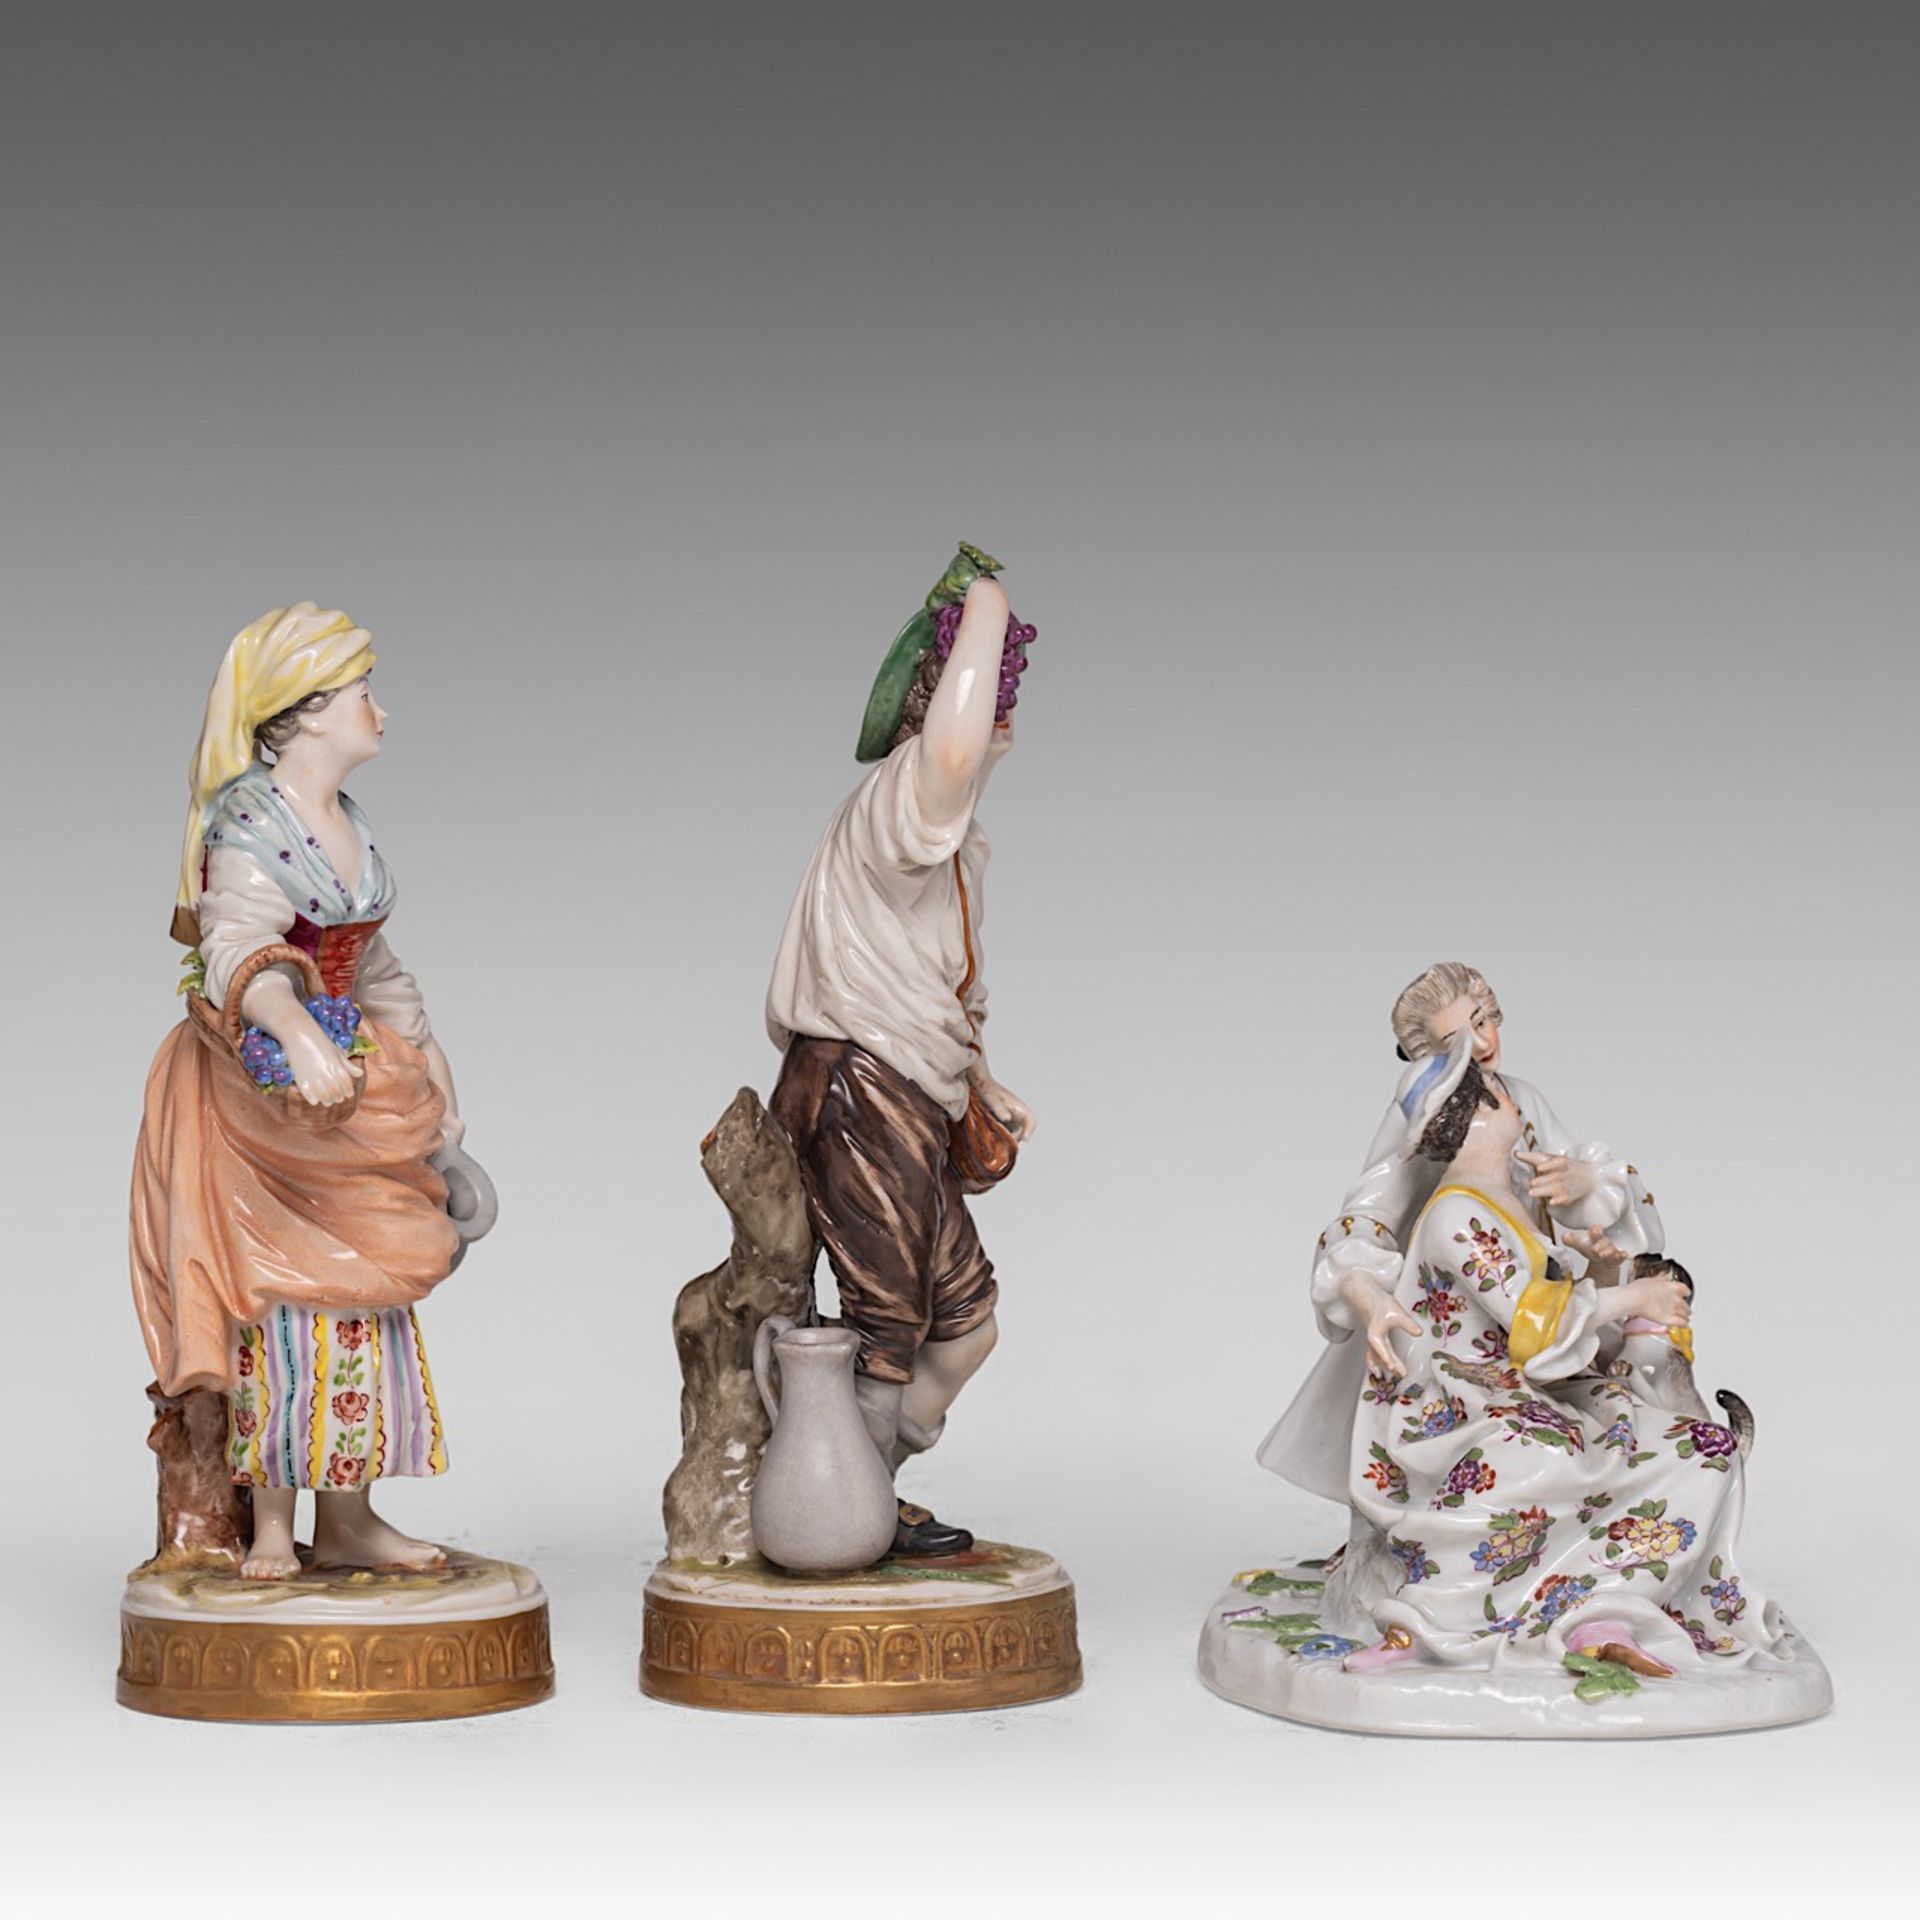 A collection of polychrome decorated Saxon porcelain figurines and a candelabra, H 51,5 cm (tallest) - Image 9 of 13